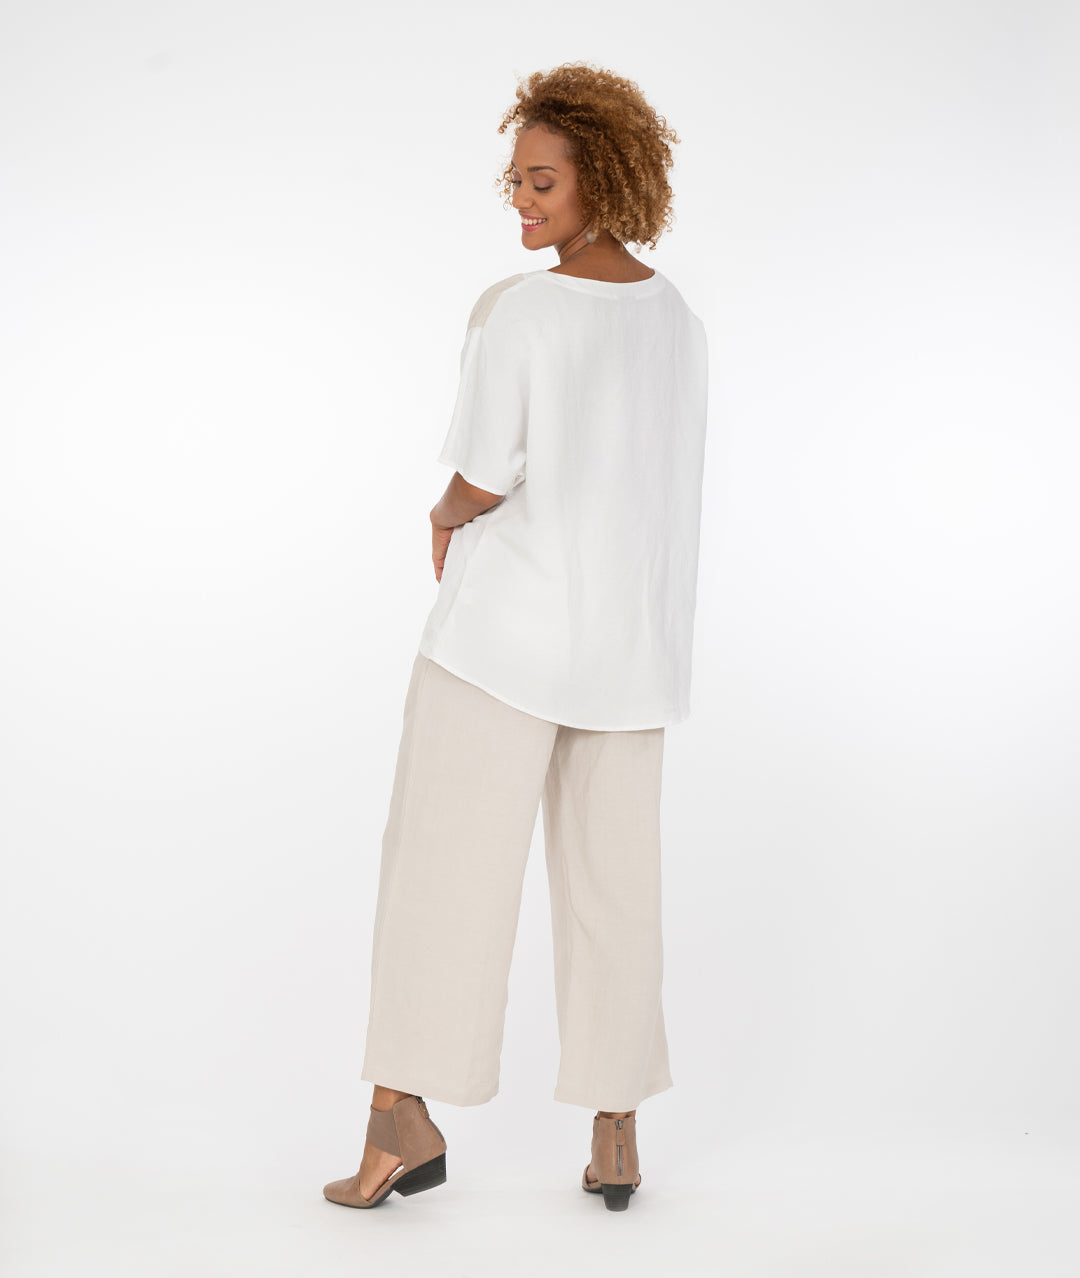 model in a white pullover tshirt style top with a contrasting color block across the body in a khaki color, with wide leg khaki color pants, back view